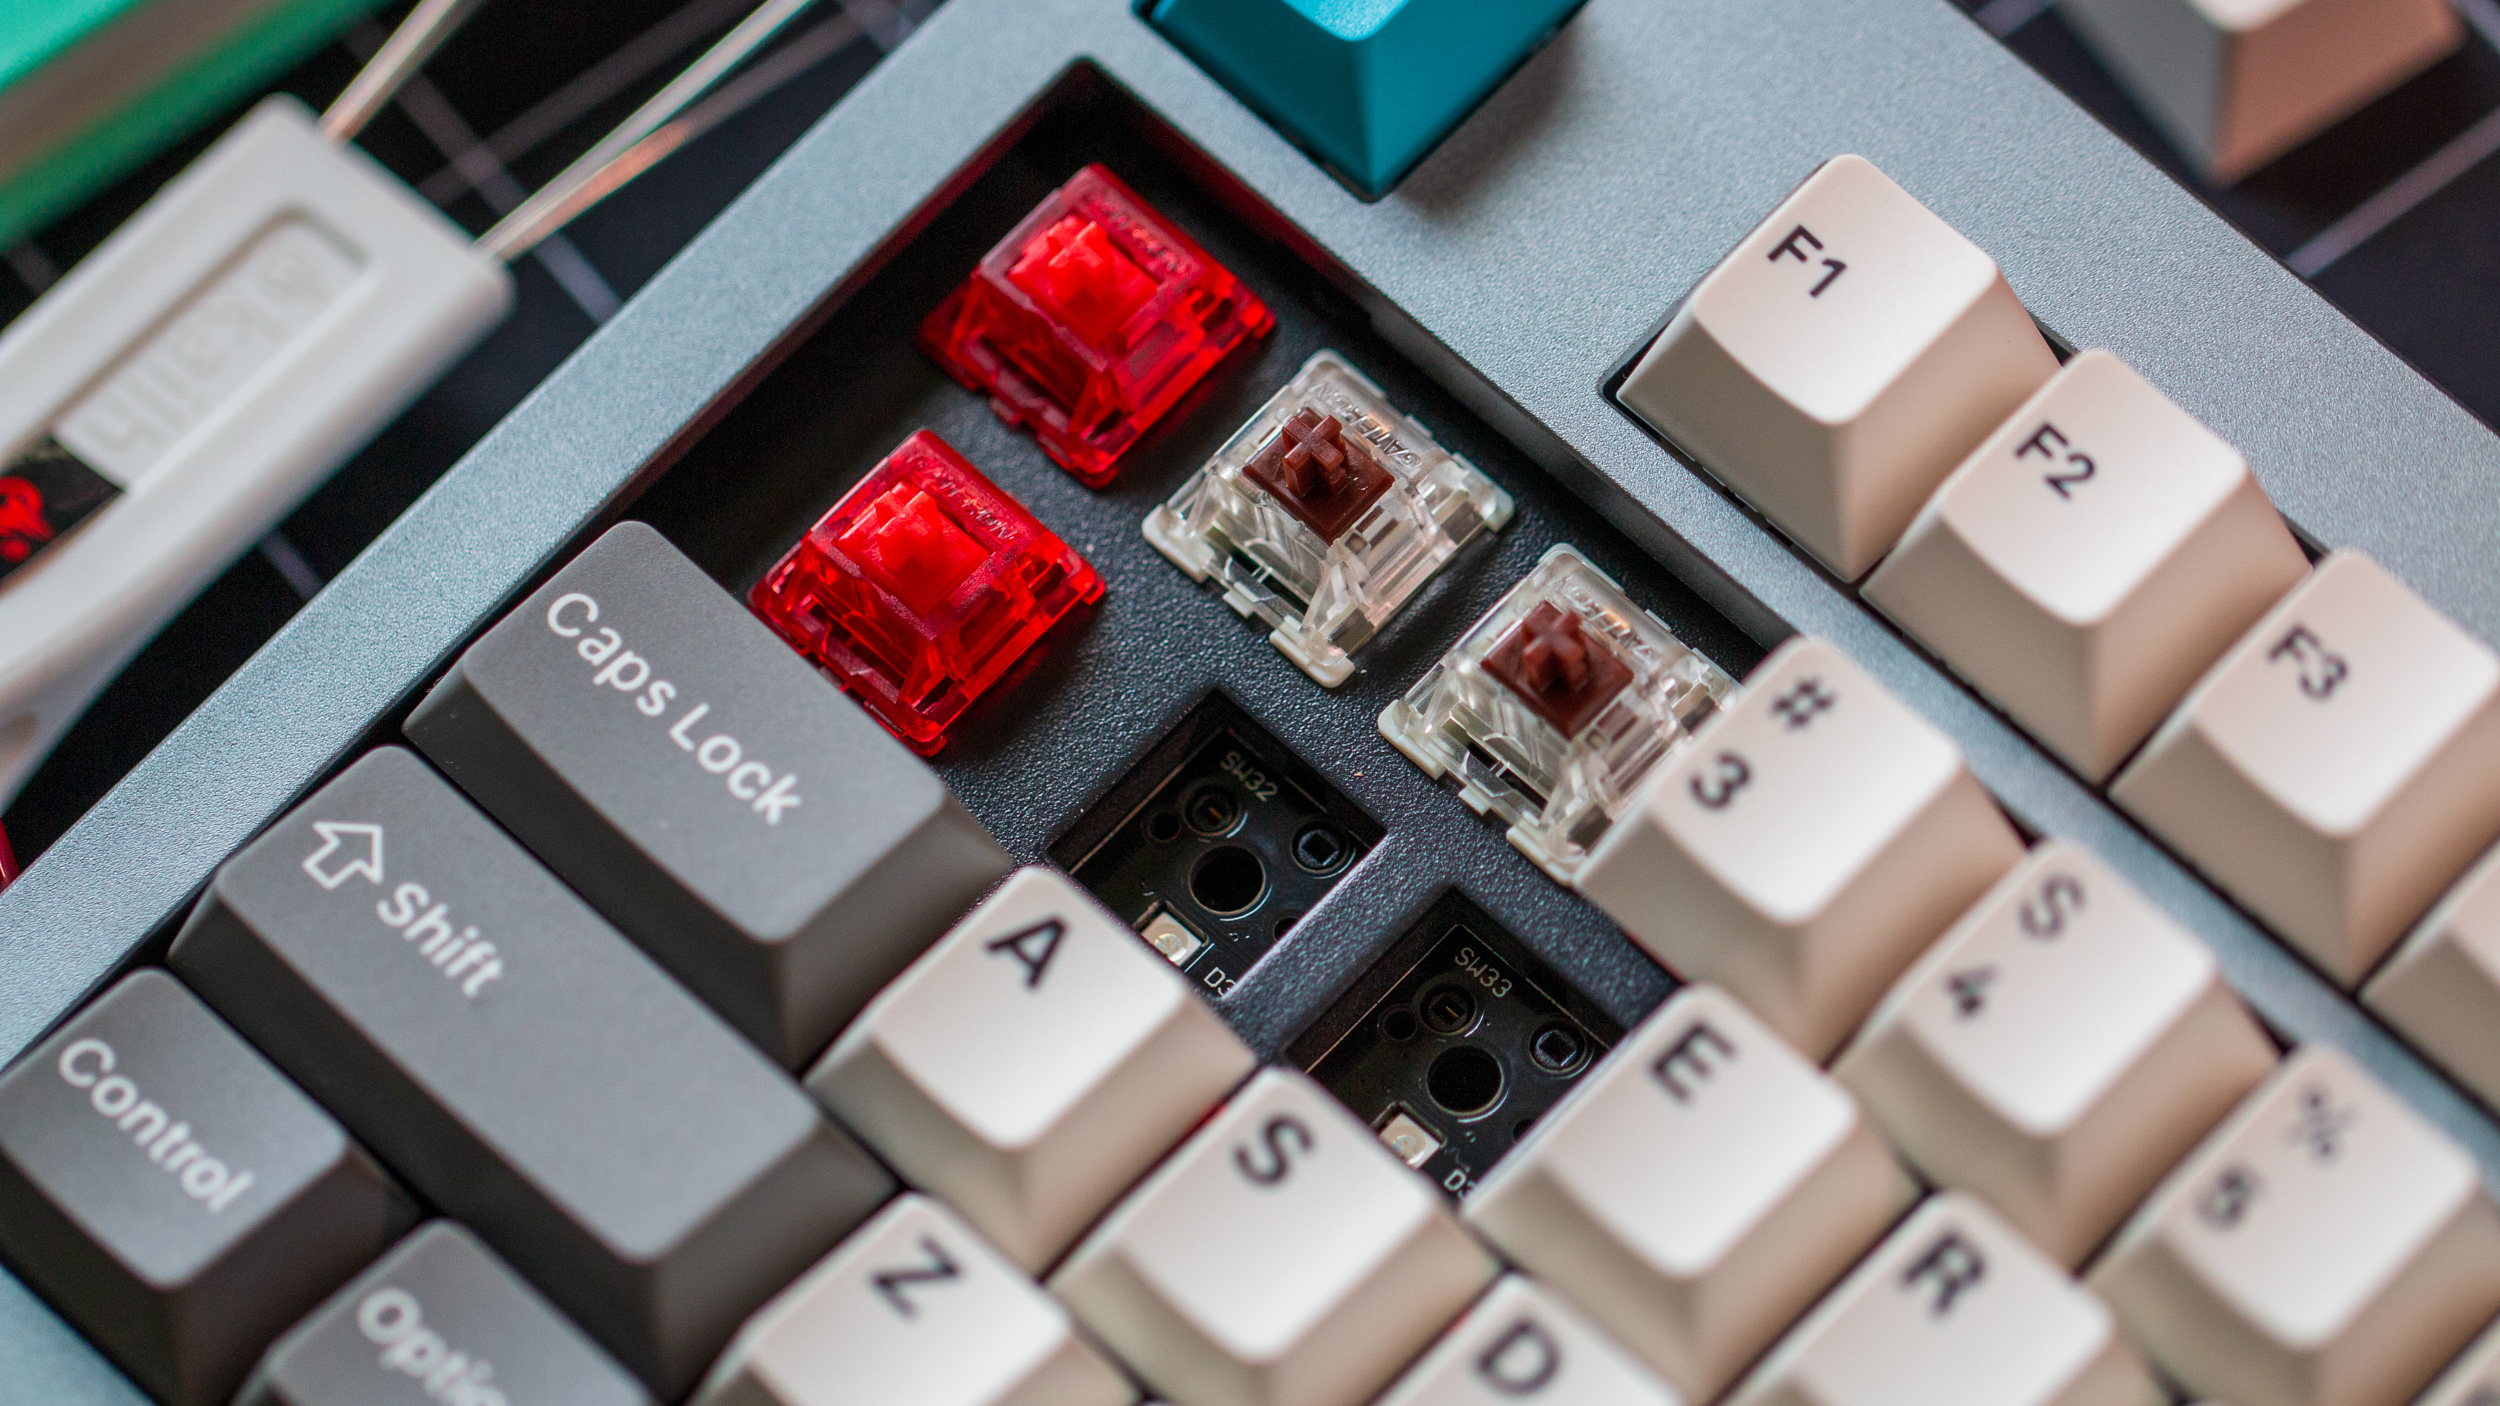 Keychron Q5 close-up on Gateron Pro Reds and Gateron Pro Brown switches